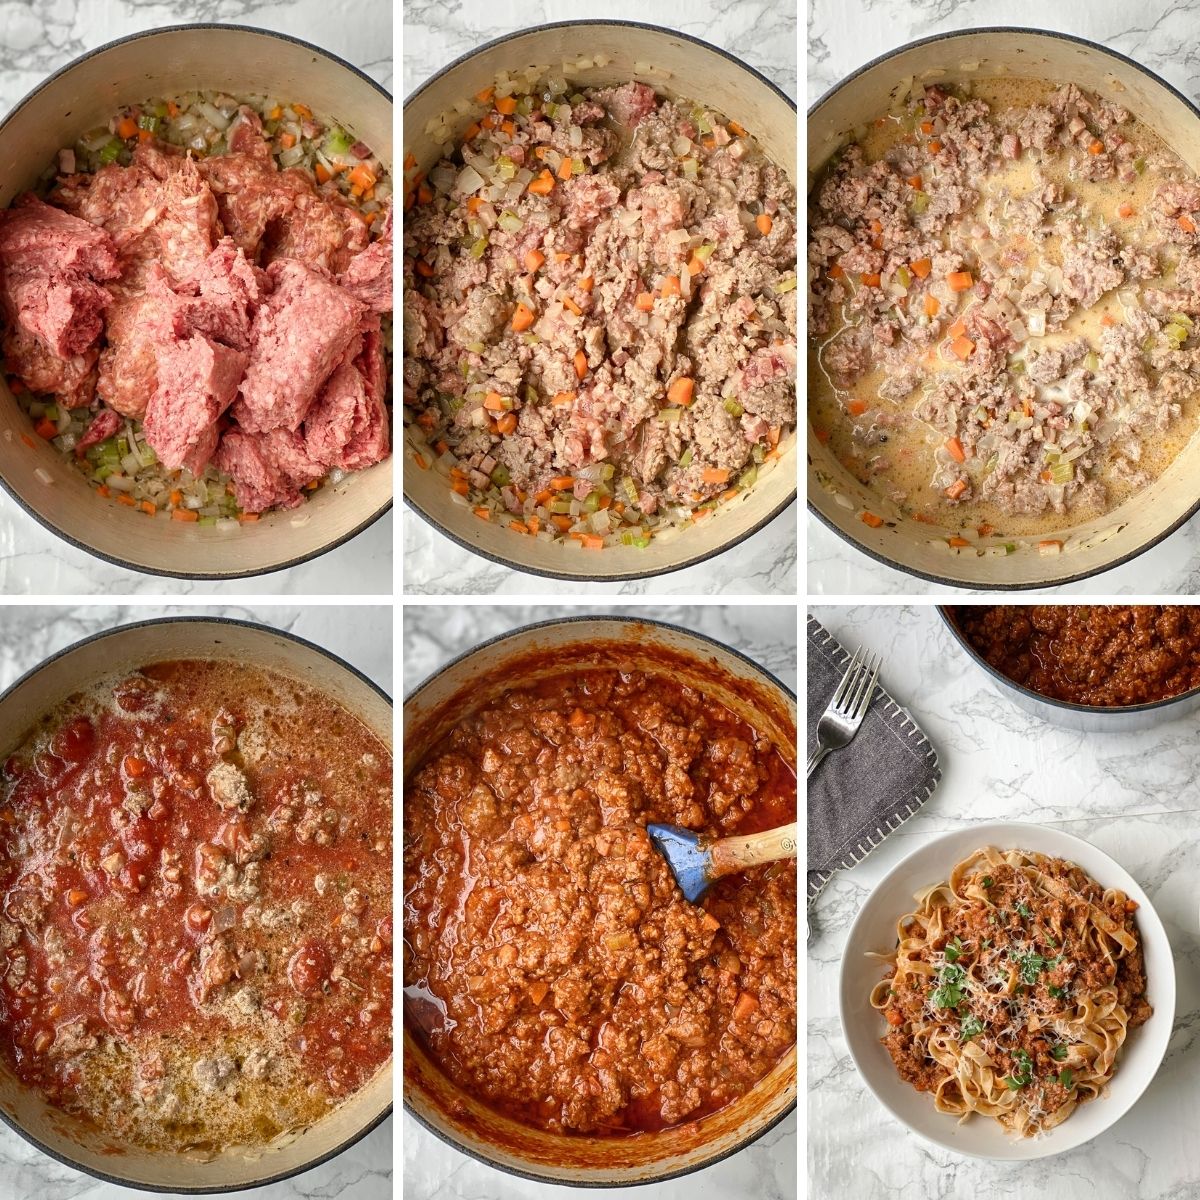 a second collage showing the final cooking steps to making bolognese.